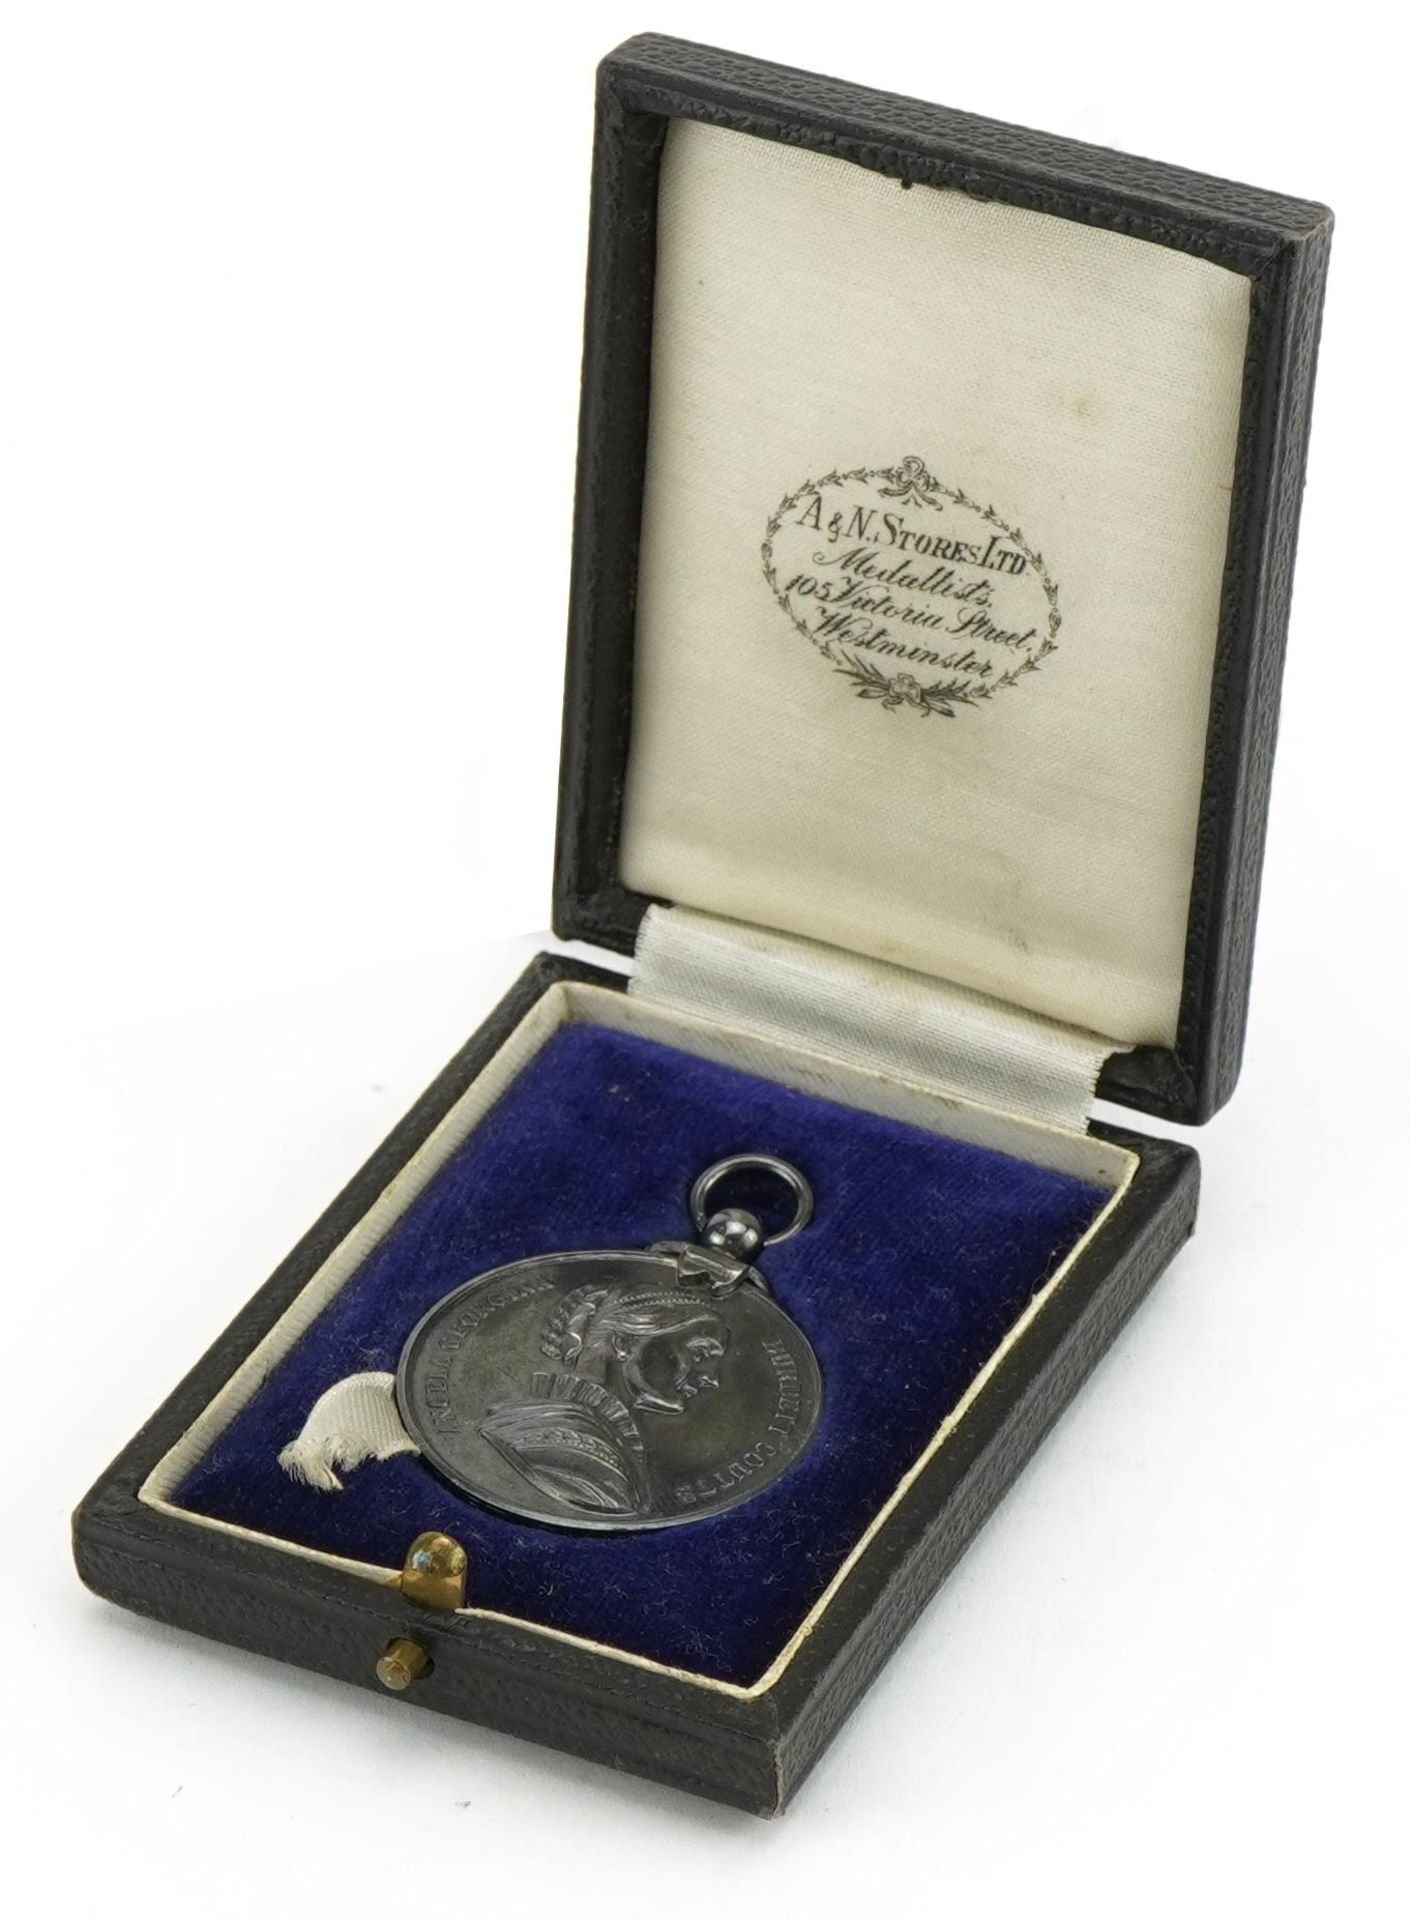 Silver Burdett Coutts & Townshend School Conduct Industry Attendance jewel with fitted case, 4cm - Image 4 of 4